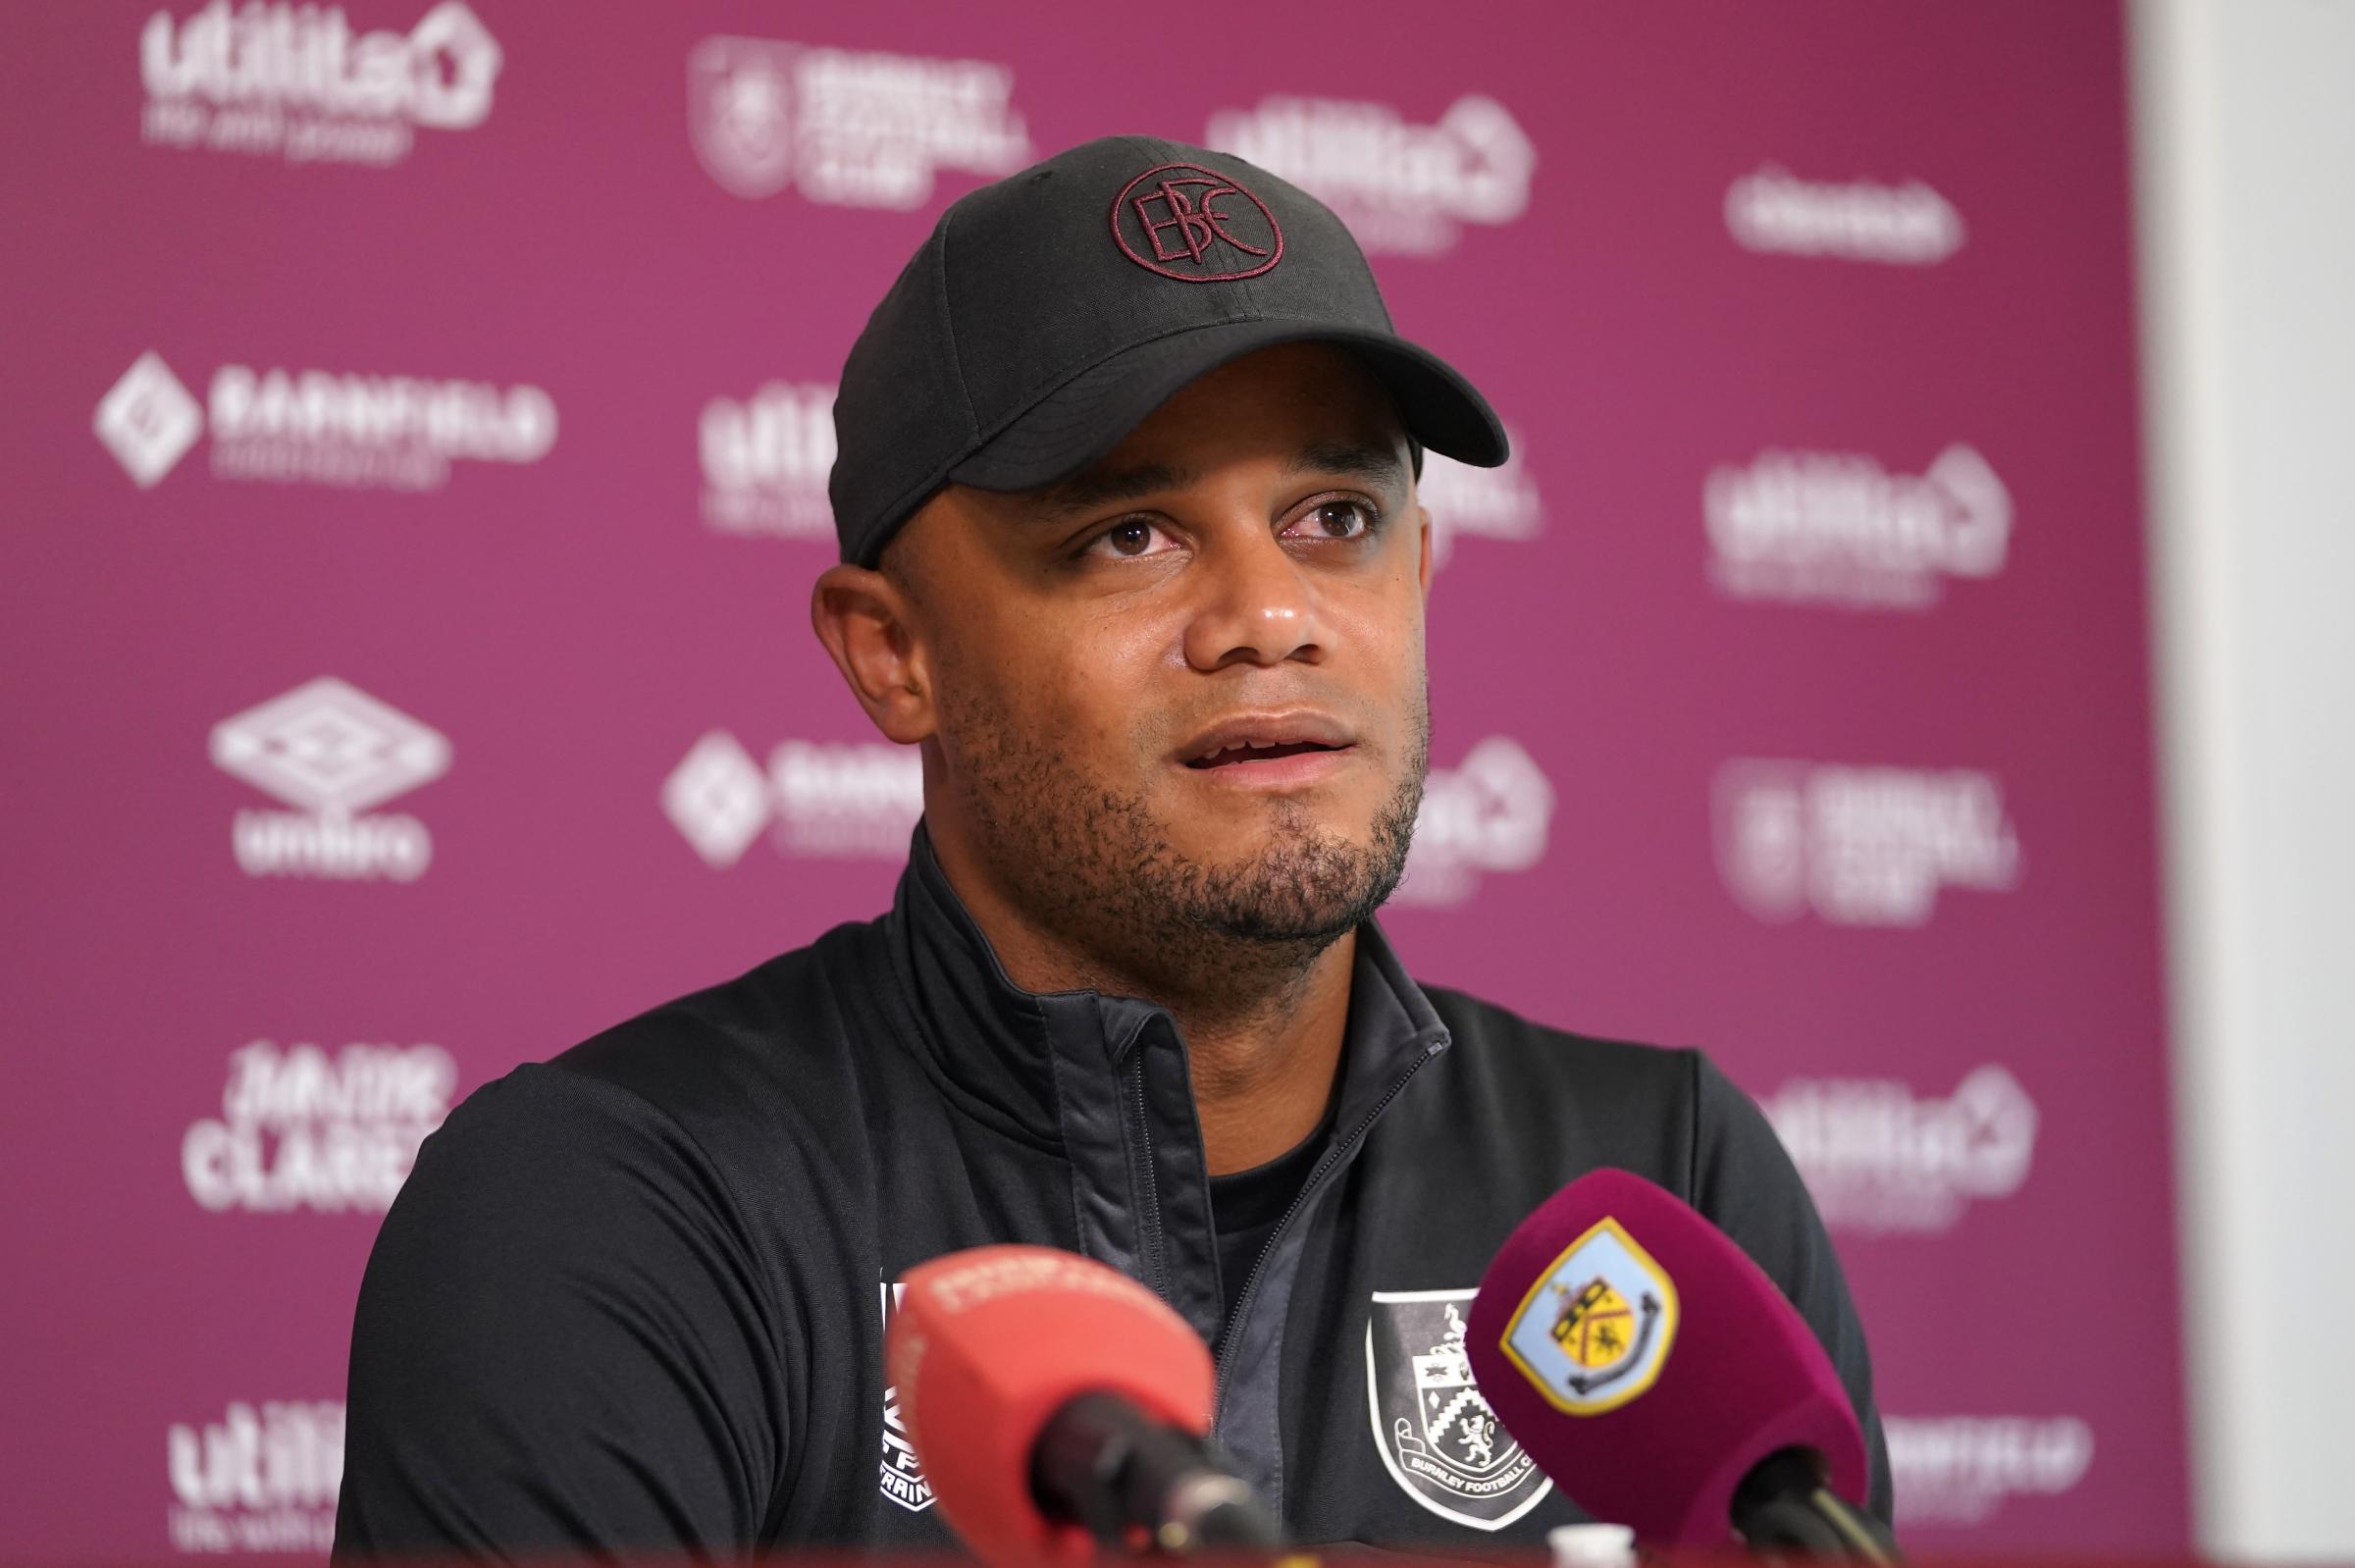 Vincent Kompany on what he learned from Pep Guardiola and 'unbelievable' culture at Burnley